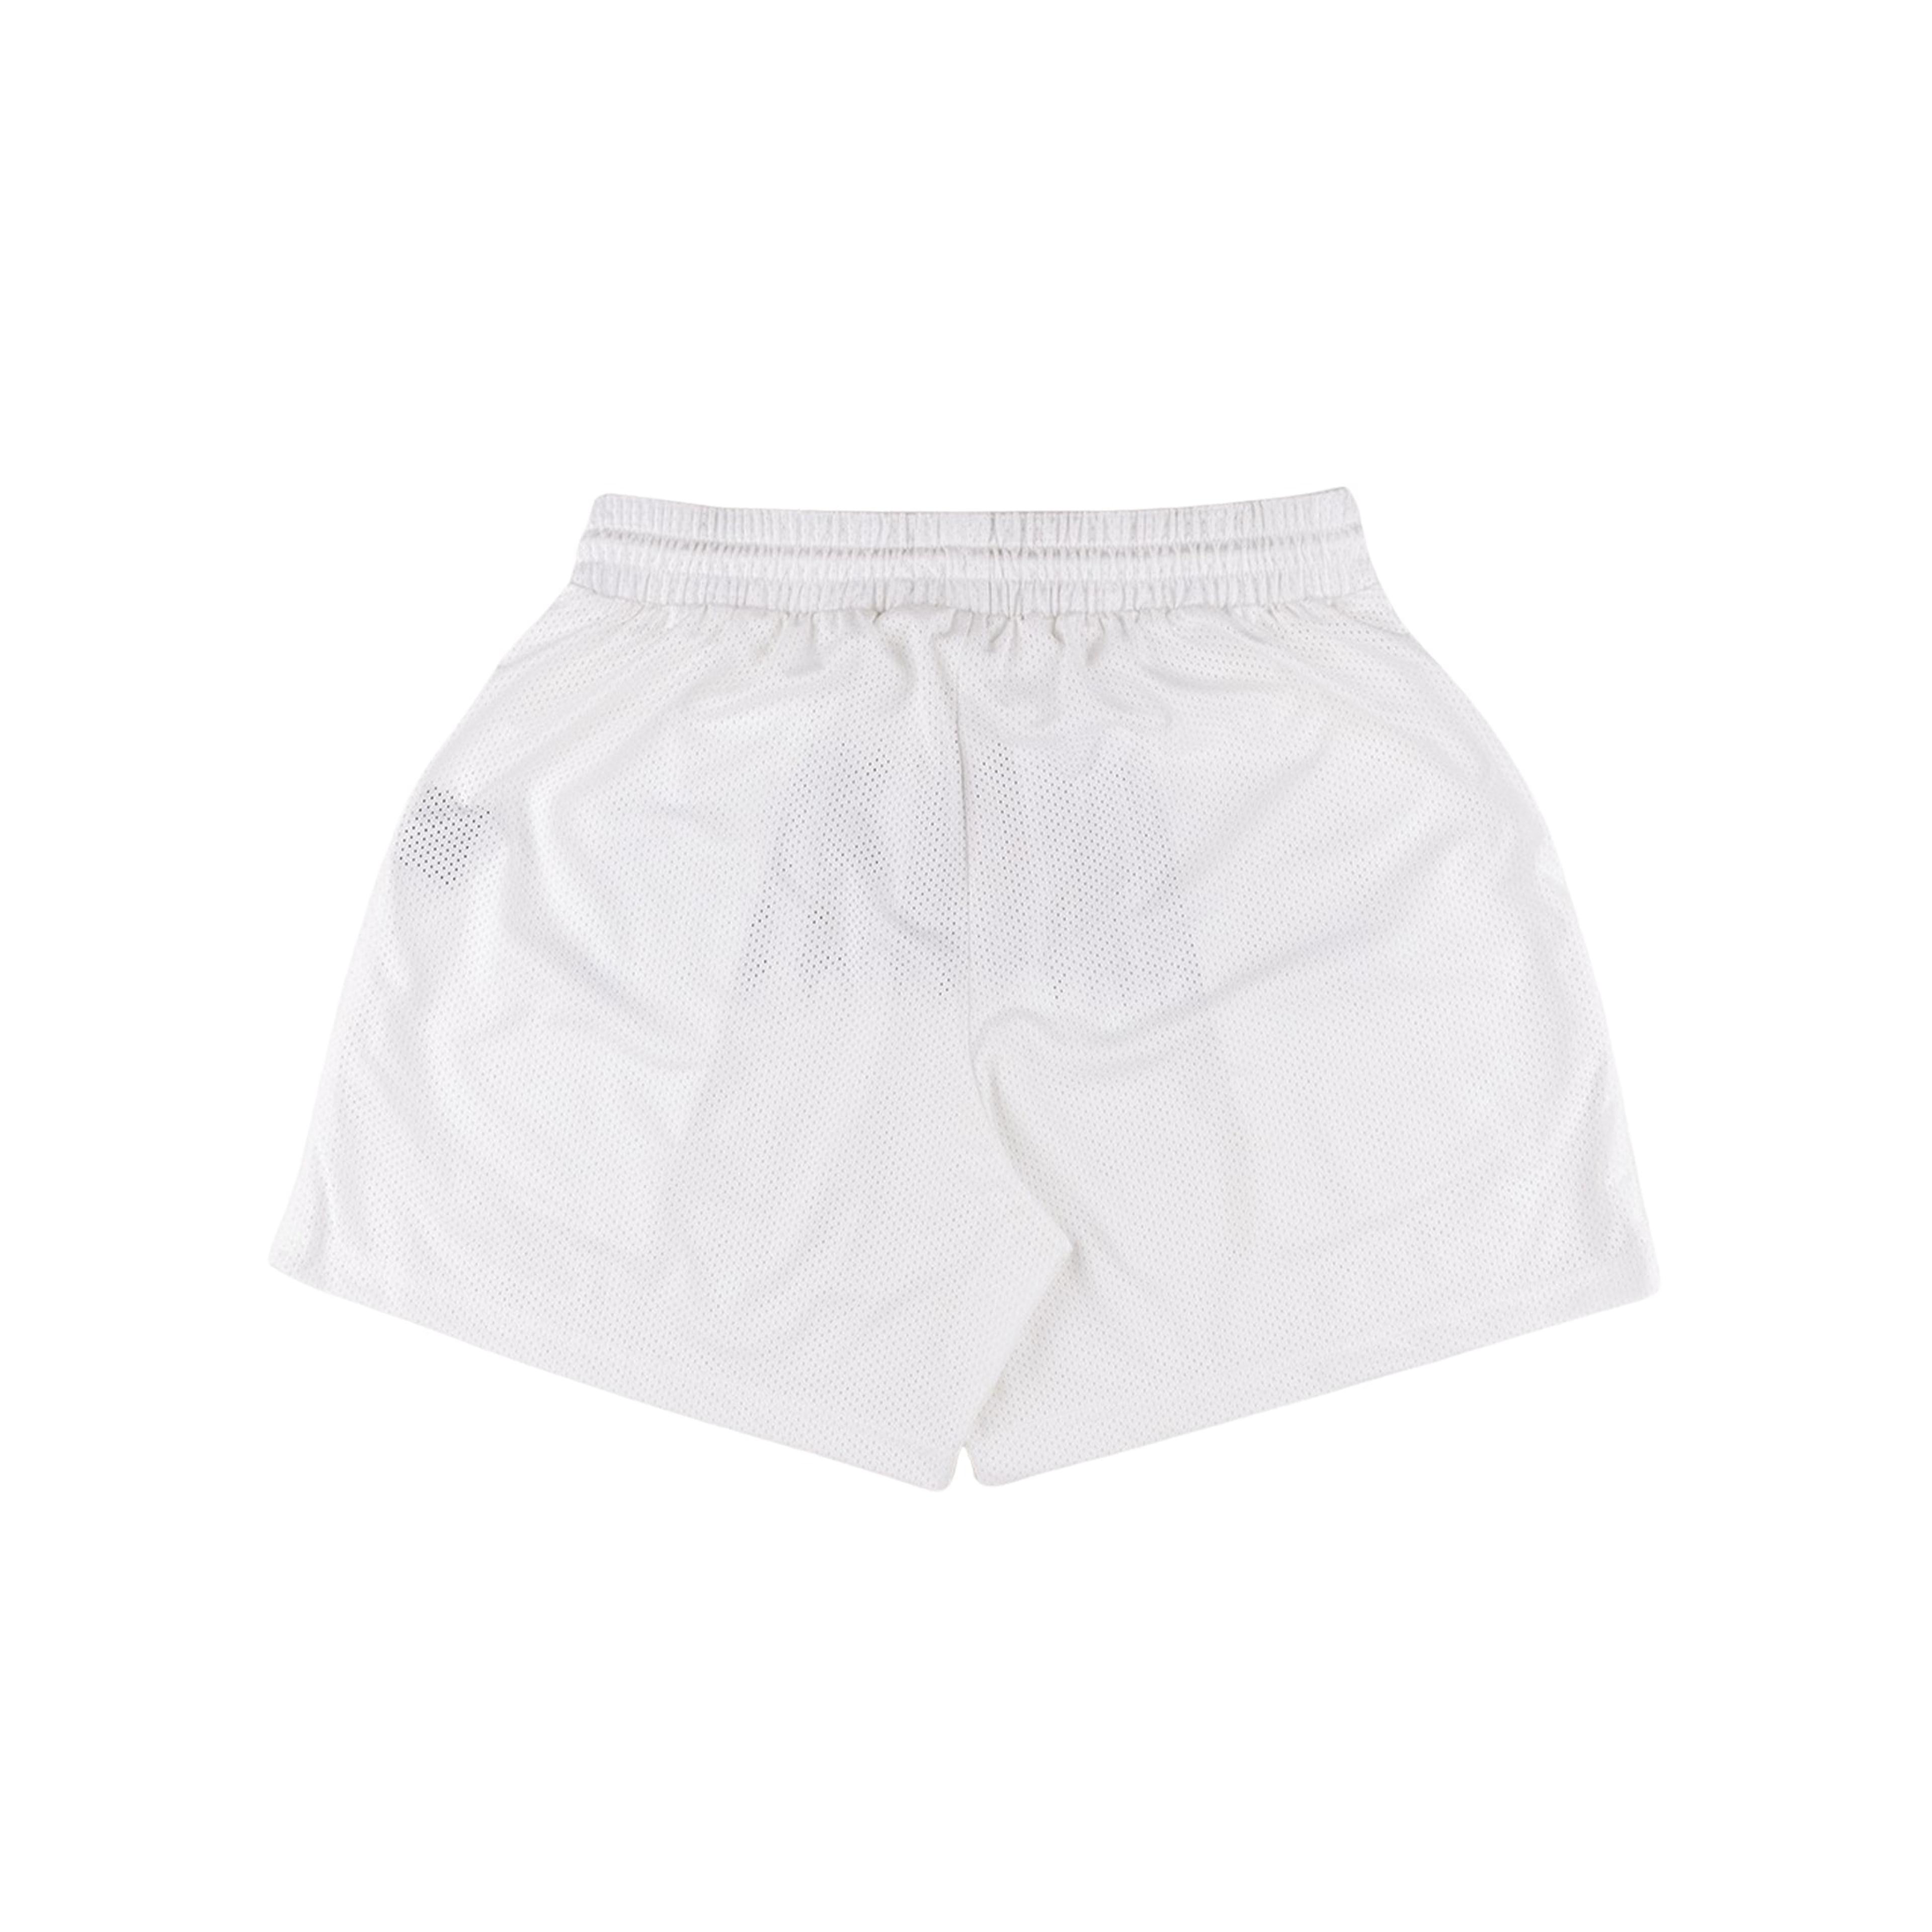 Alternate View 3 of Common Hype White Old English Shorts